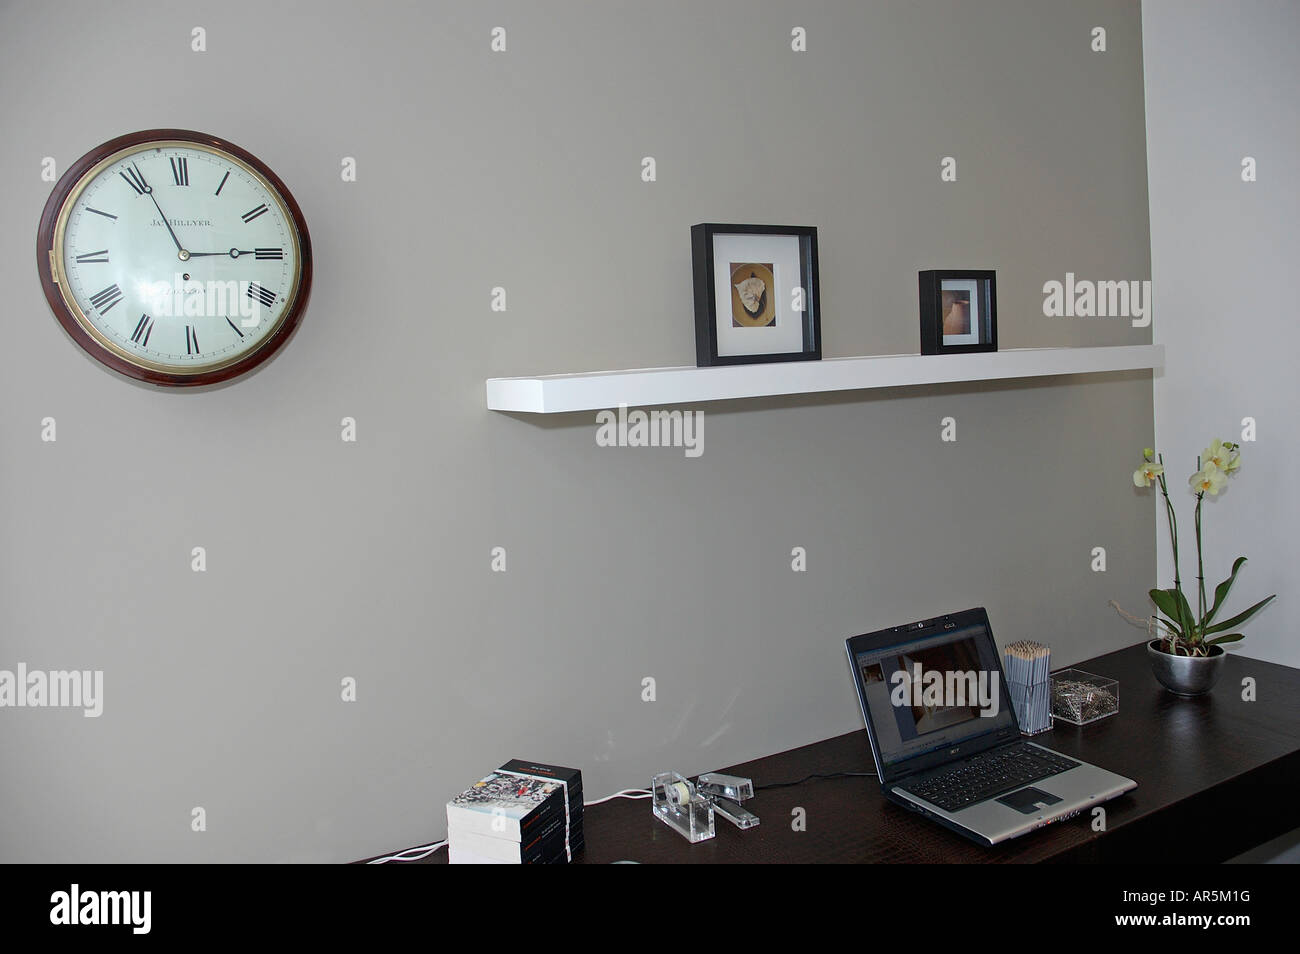 Circular Clock On Wall Above Laptop Computer On Desk In Modern